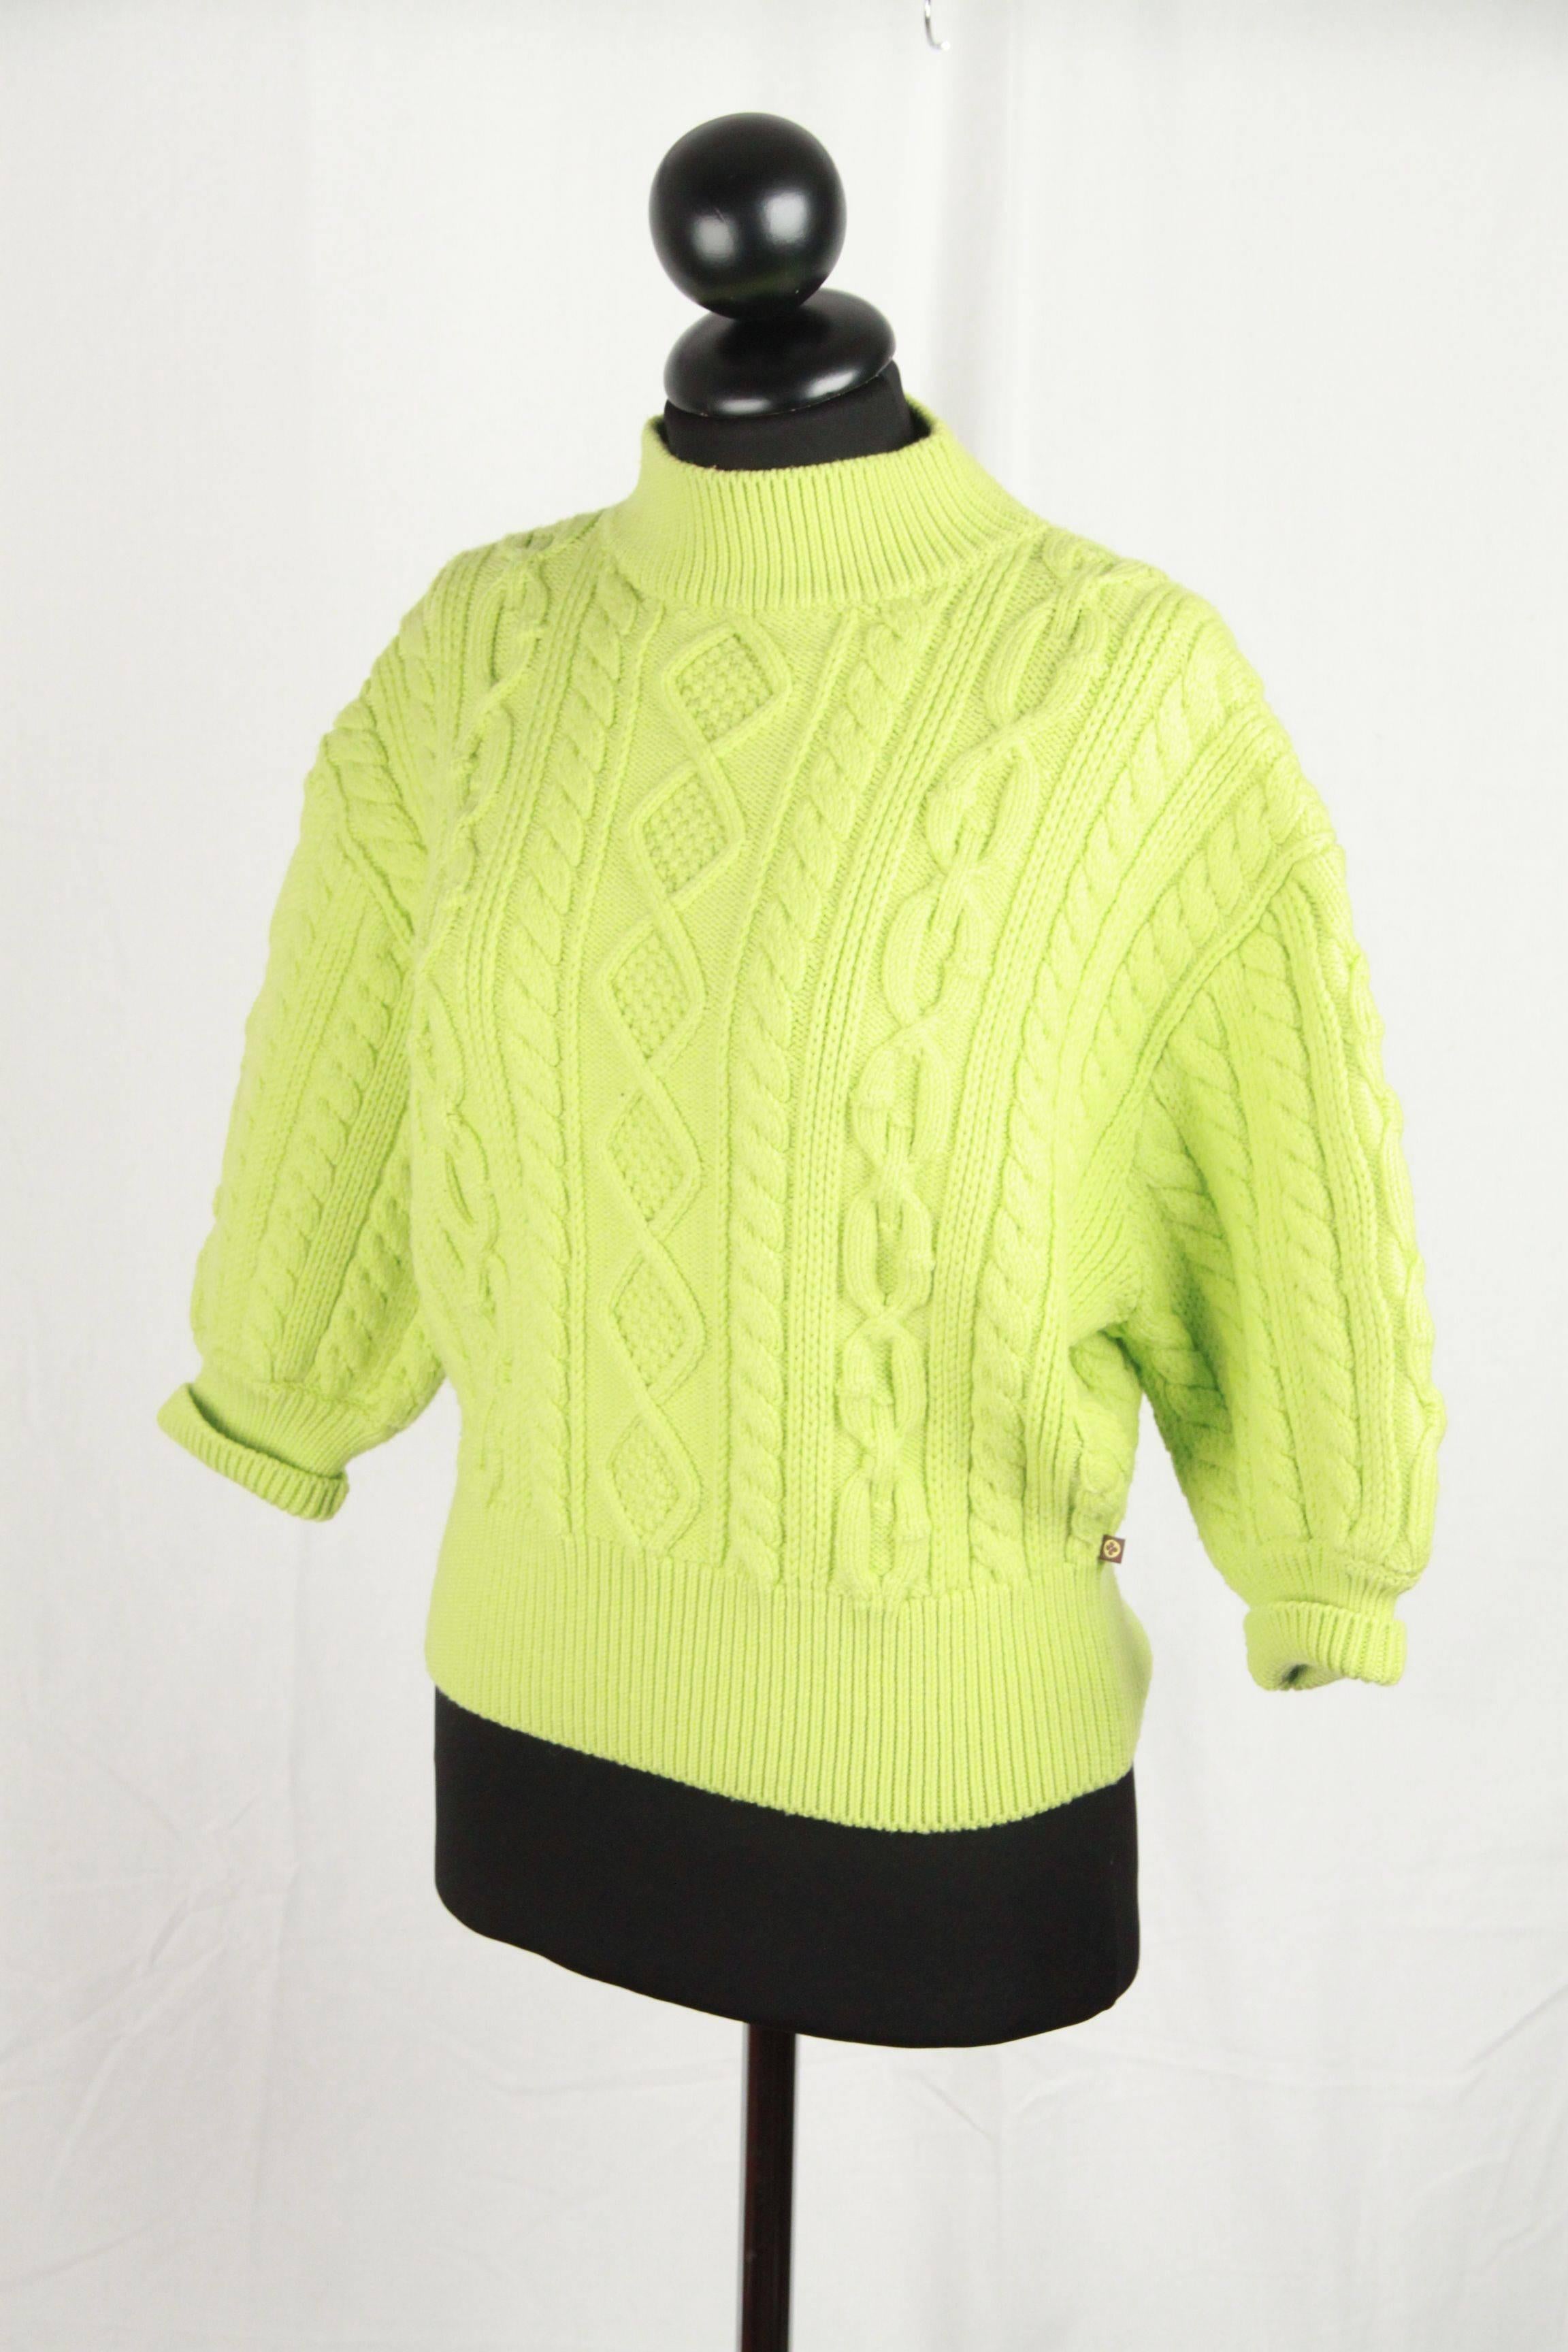 - Louis Vuitton acid green cable knit sweater 
- Composition: 81% wool, 19% nylon
- Cropped sleeves
- Funnel collar
- Size M (The size shown for this item is the size indicated by the designer on the label) 
 
Logos & Tags: 'LOUIS VUITTON Paris'